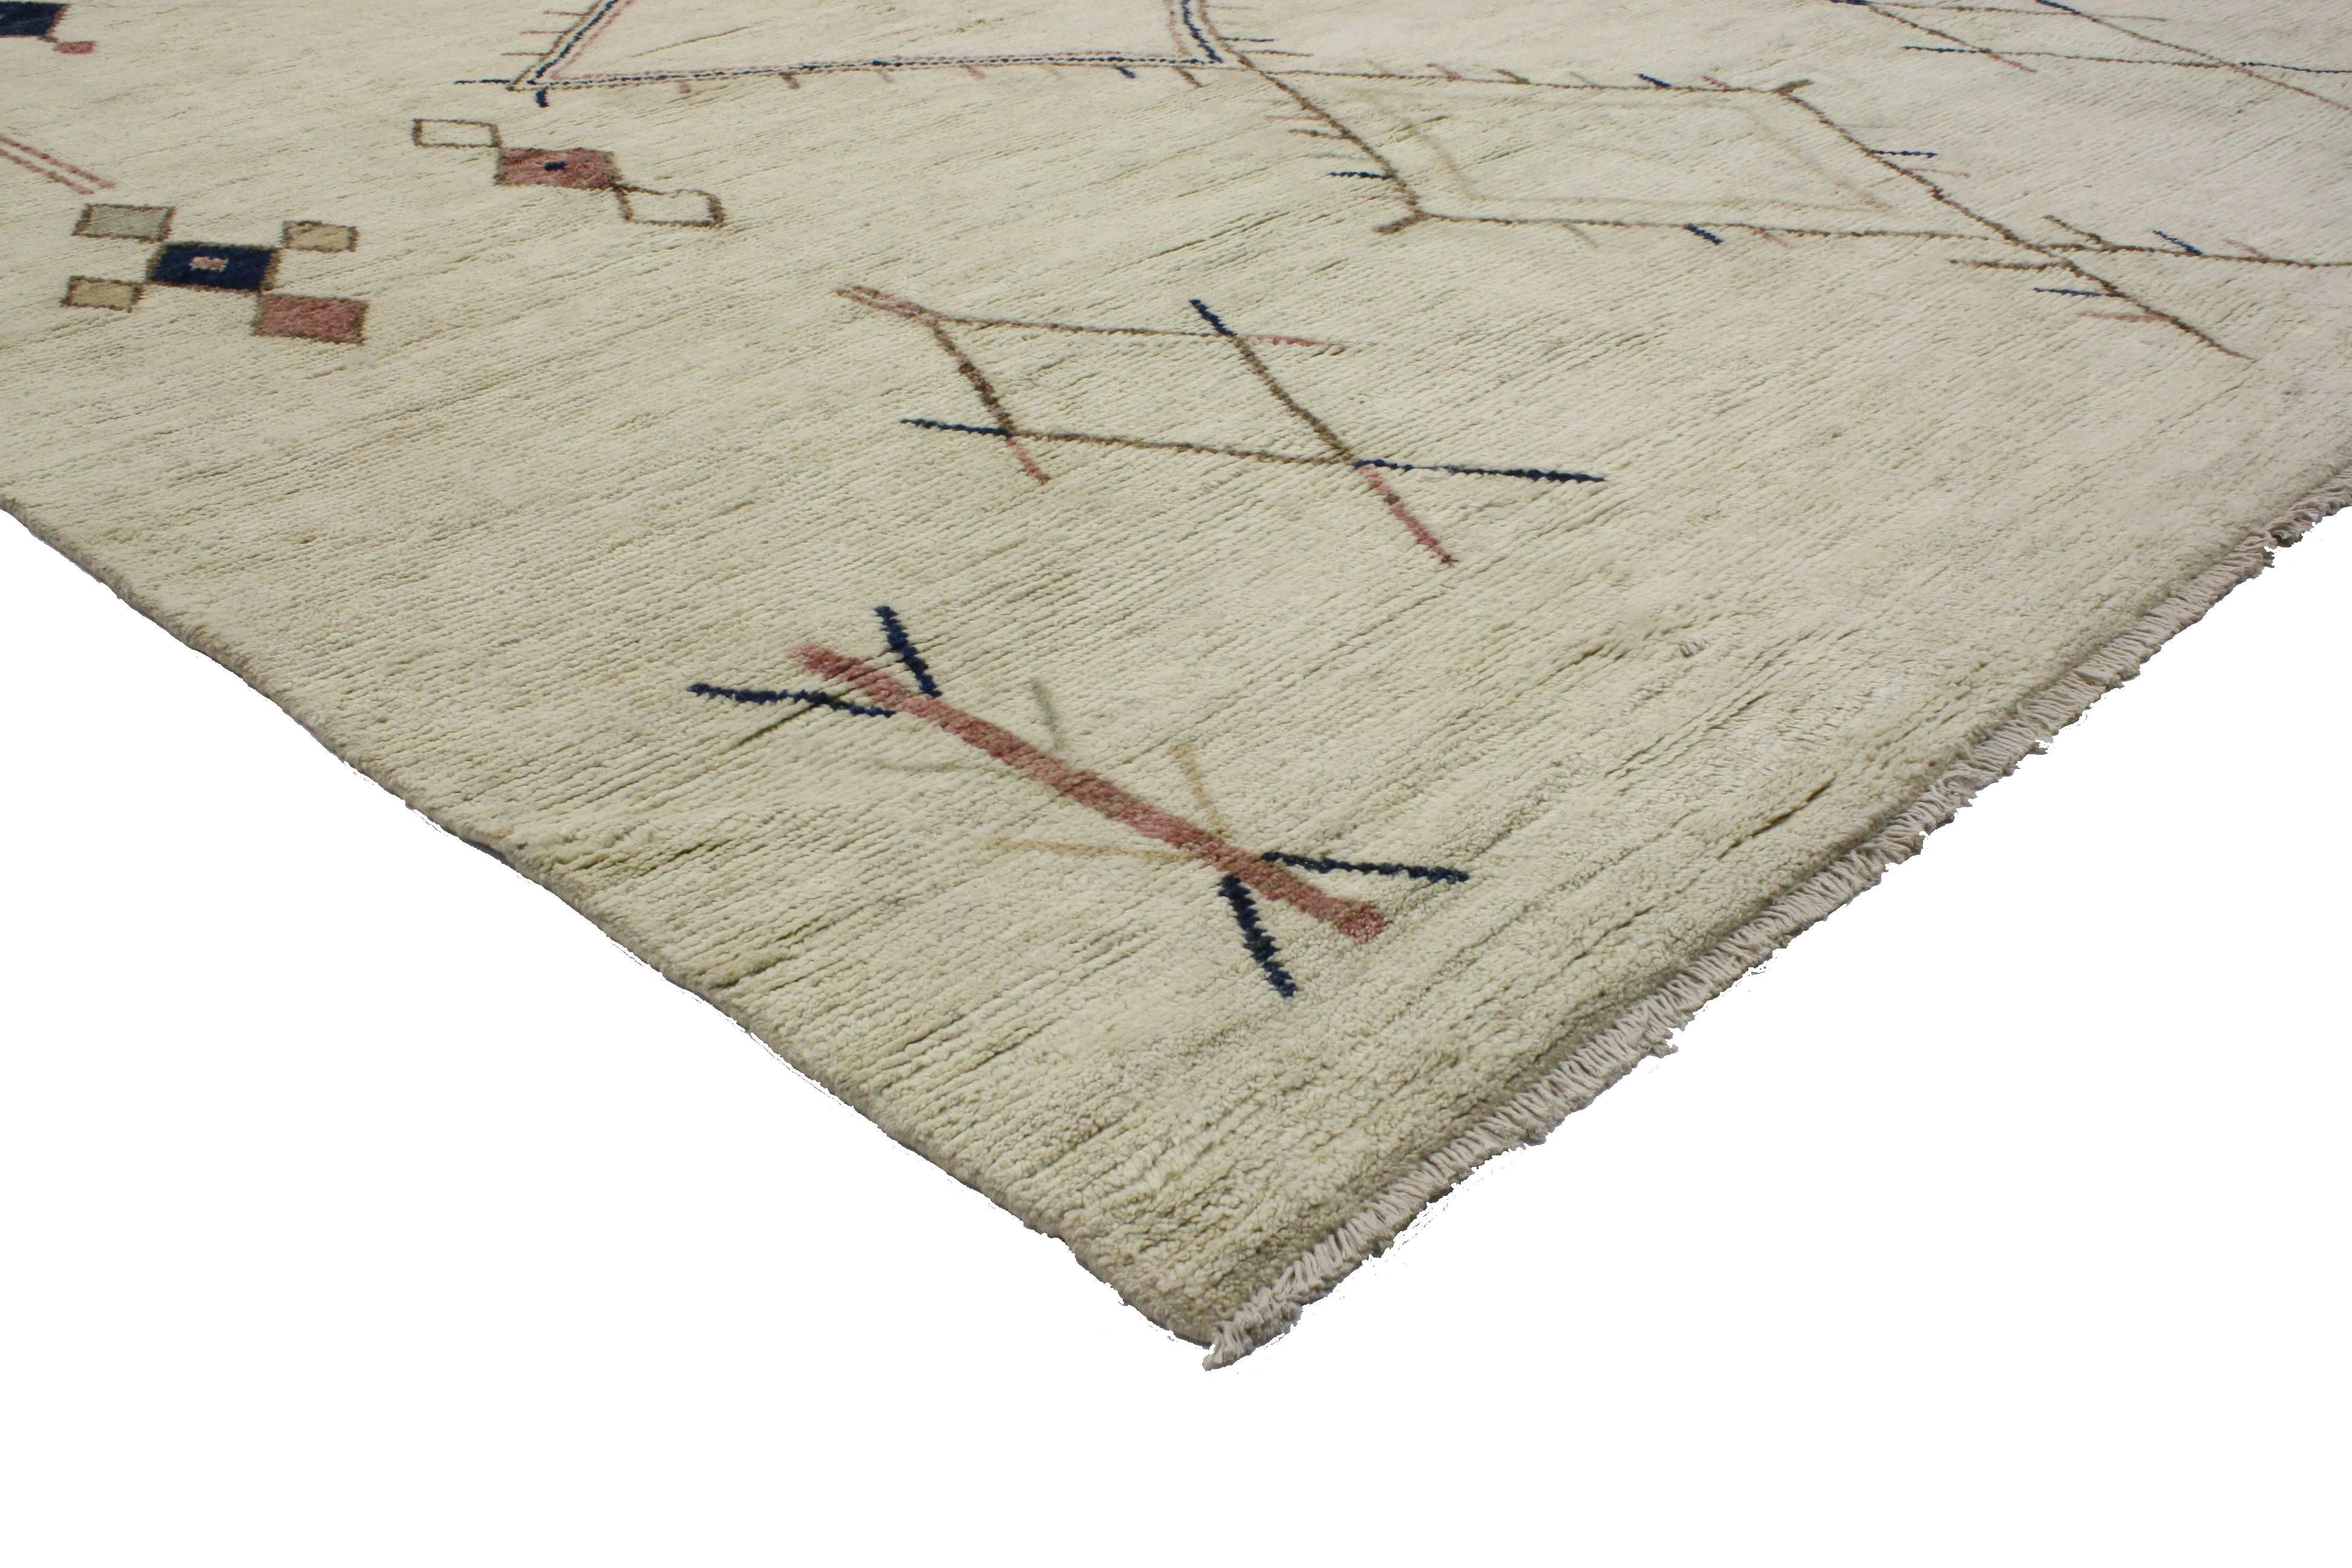 This Moroccan area rug harmonizes disparate elements, brings soothing serenity while adding texture and depth to your space. This is a fantastic example of a contemporary Moroccan style rug, woven with a clean and simple, yet sophisticated